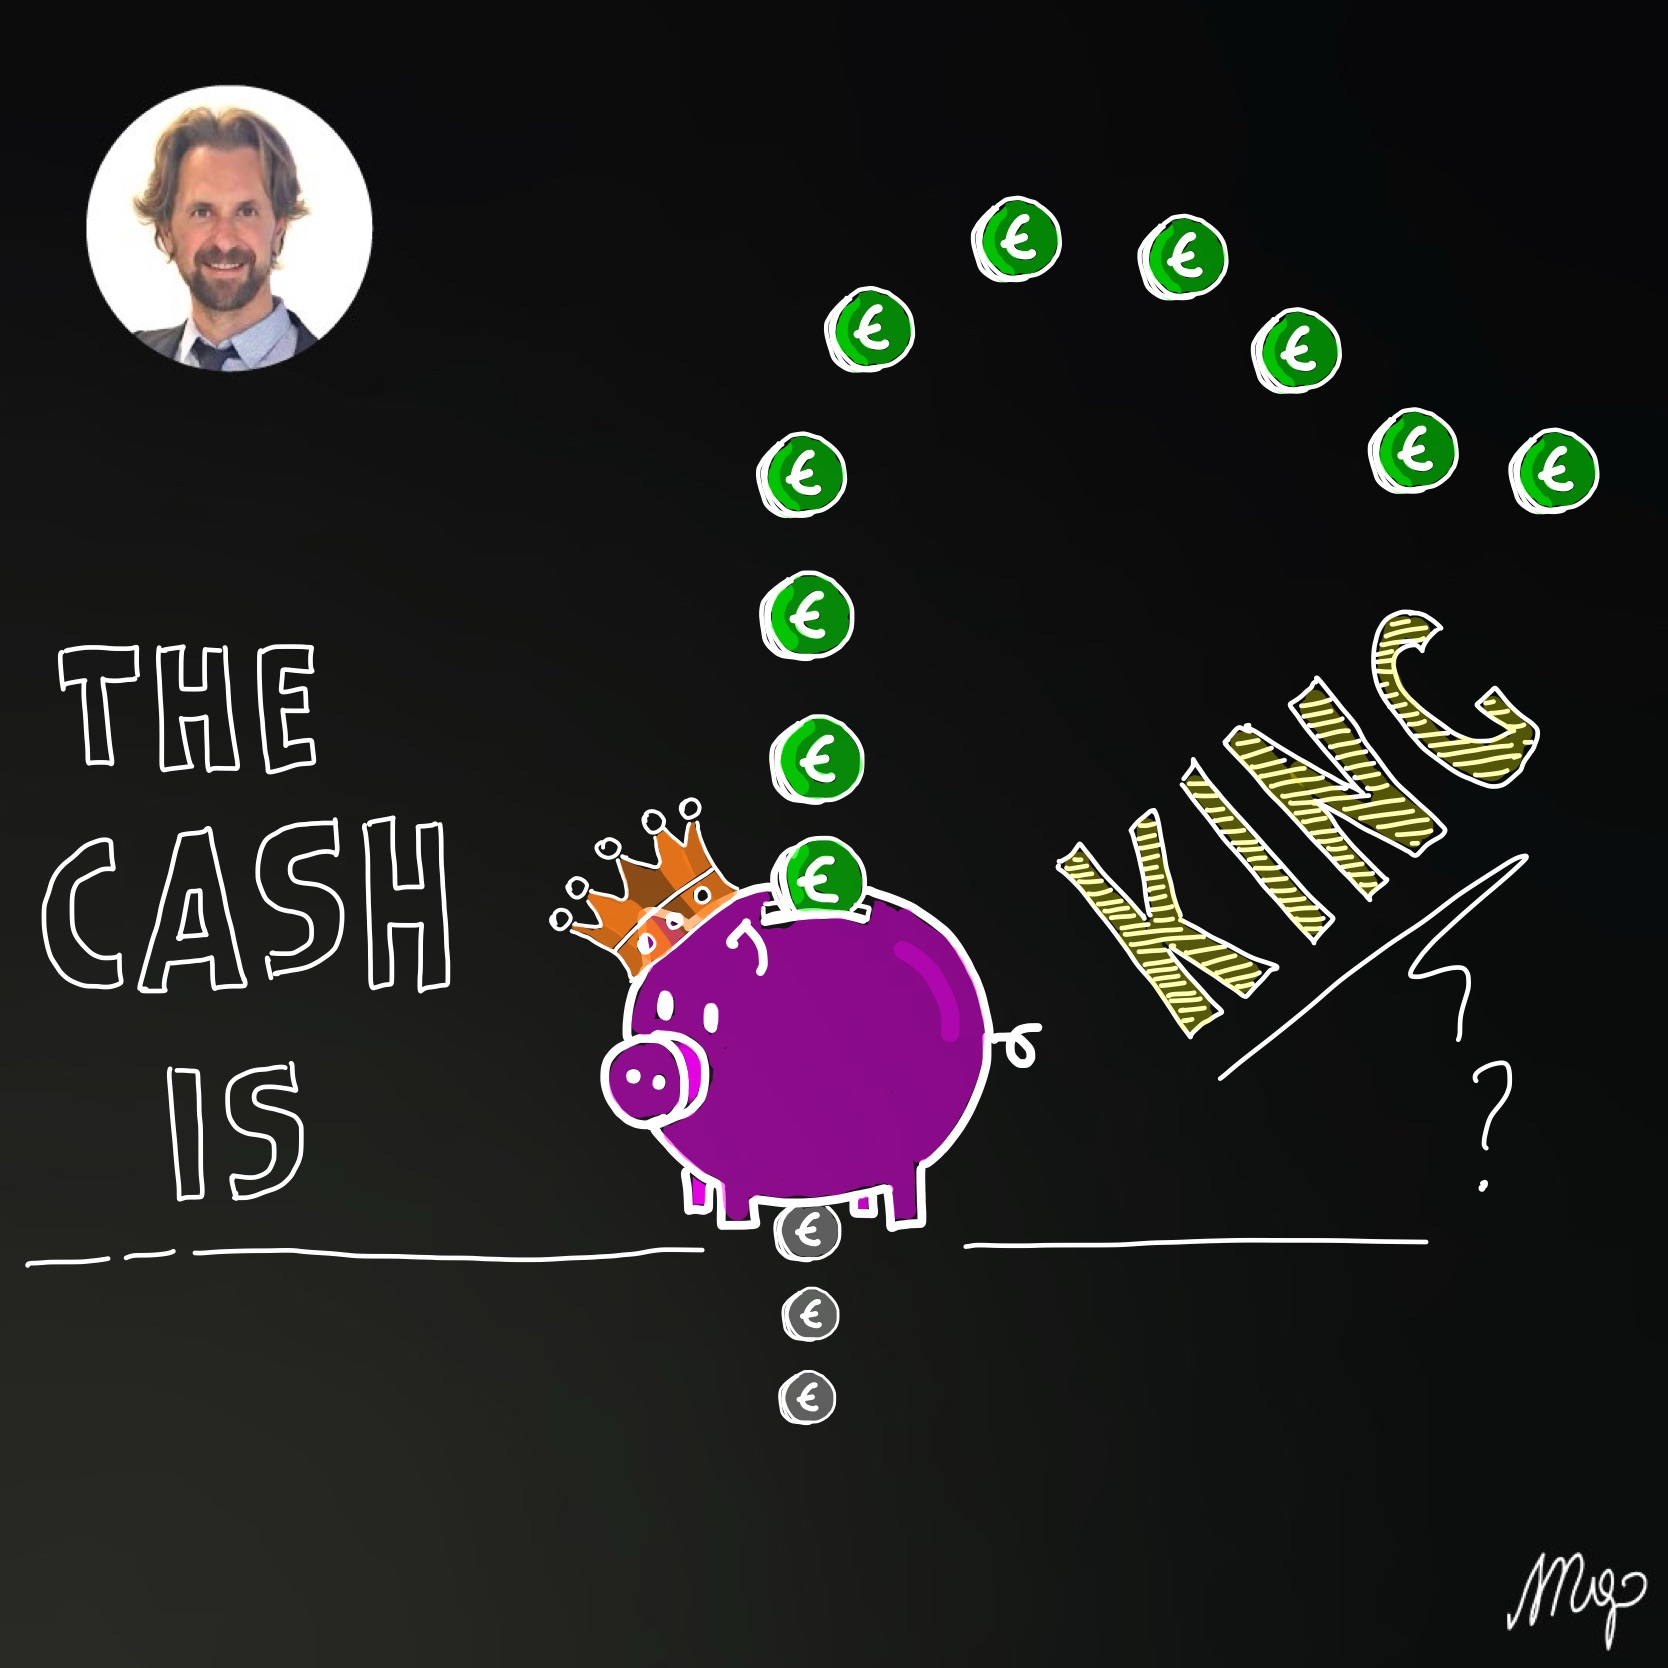 17. Cash is King? Non proprio